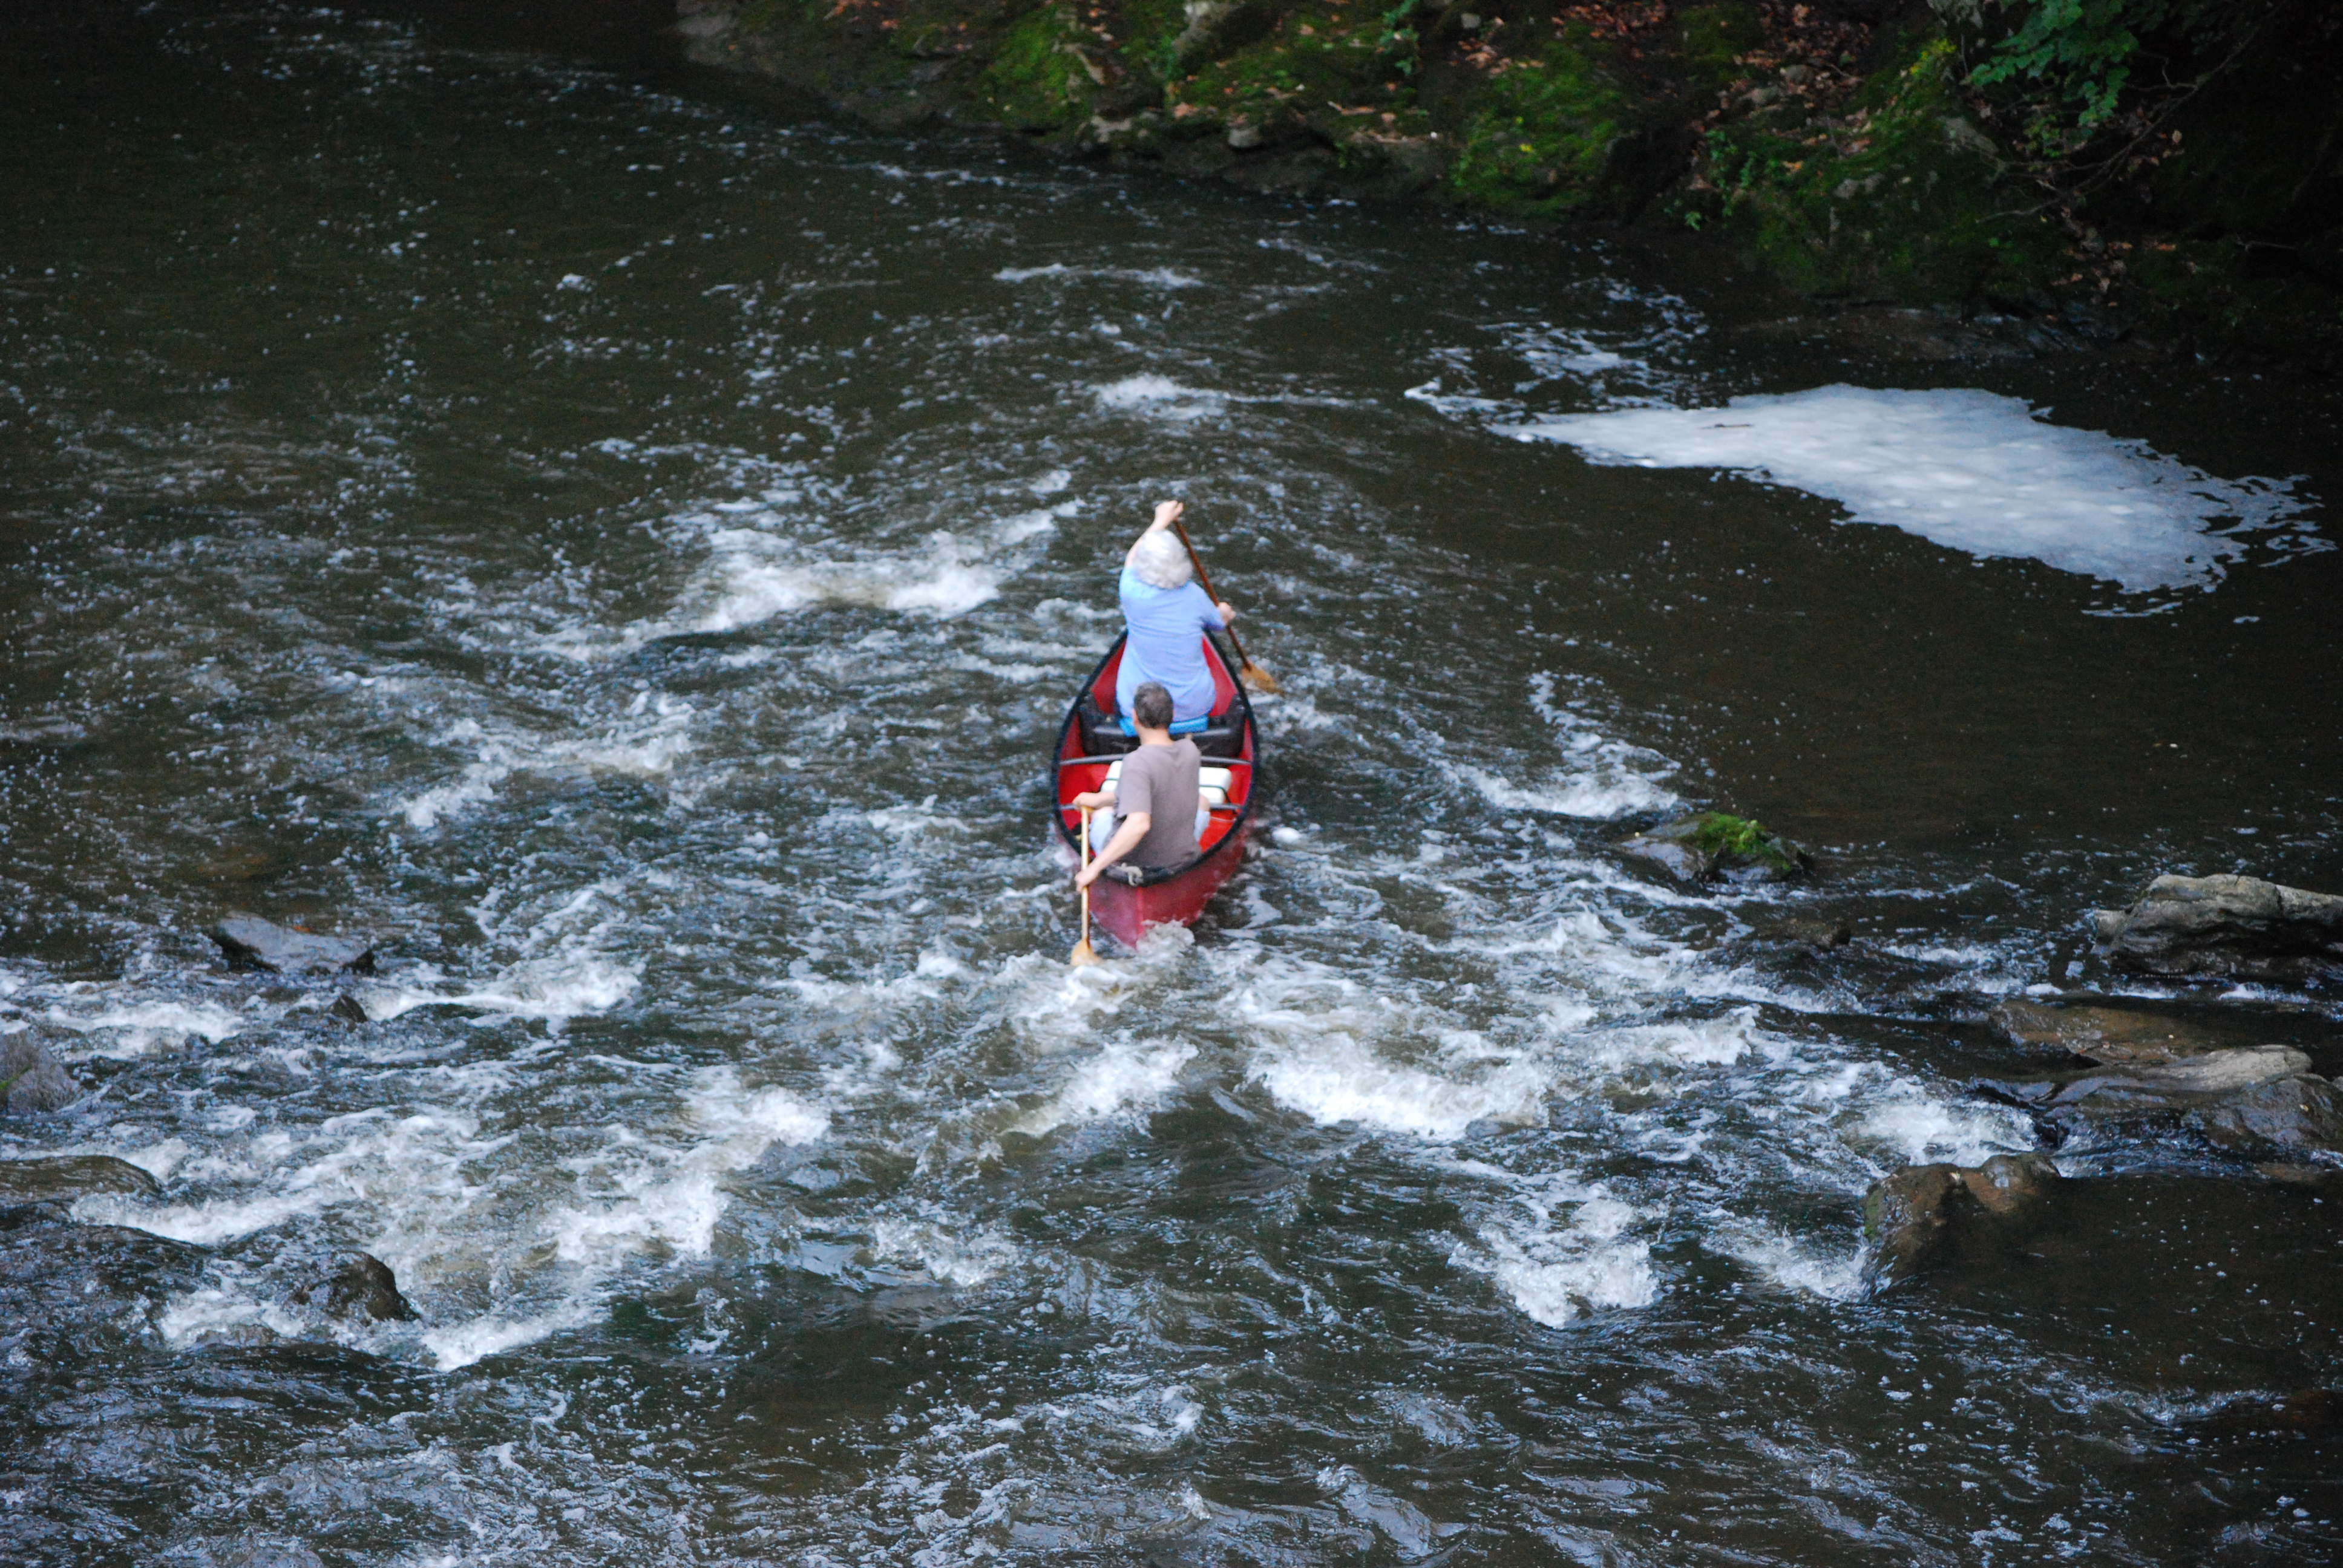 Navigating the Rapids of the Wissahickon